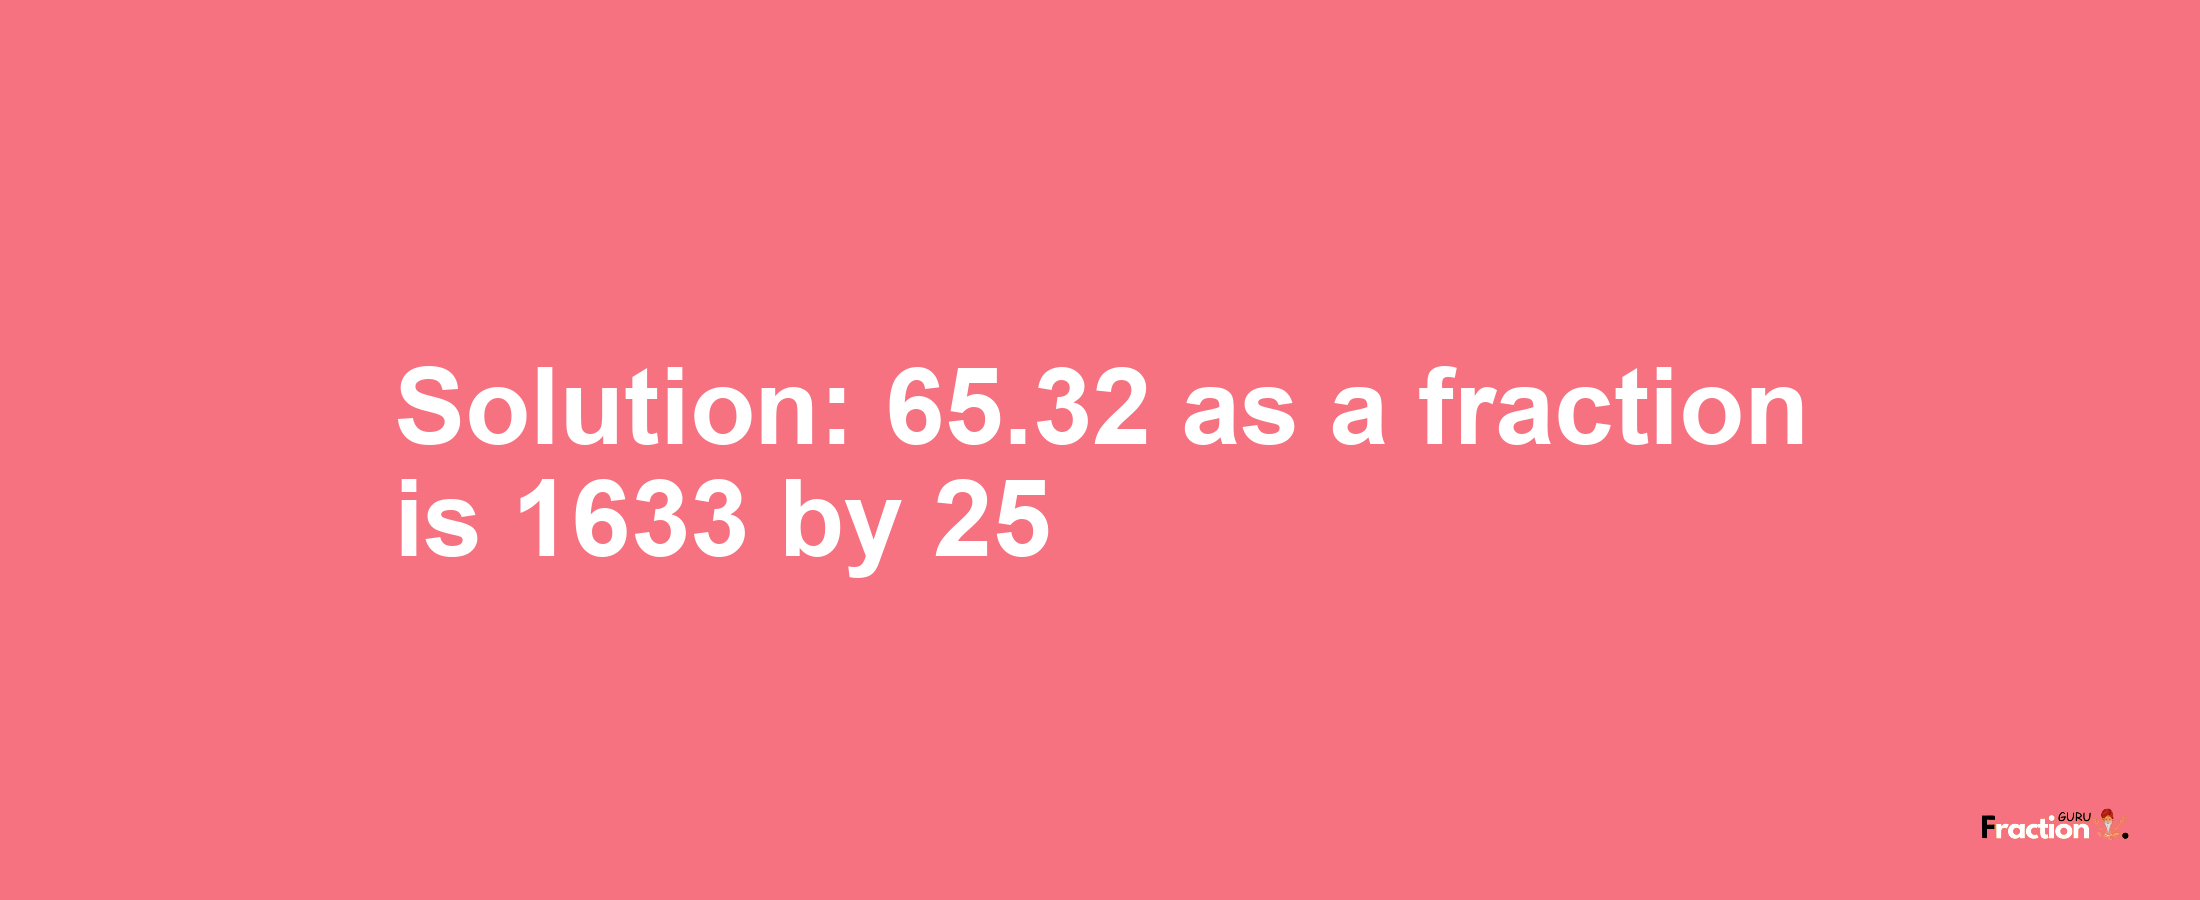 Solution:65.32 as a fraction is 1633/25